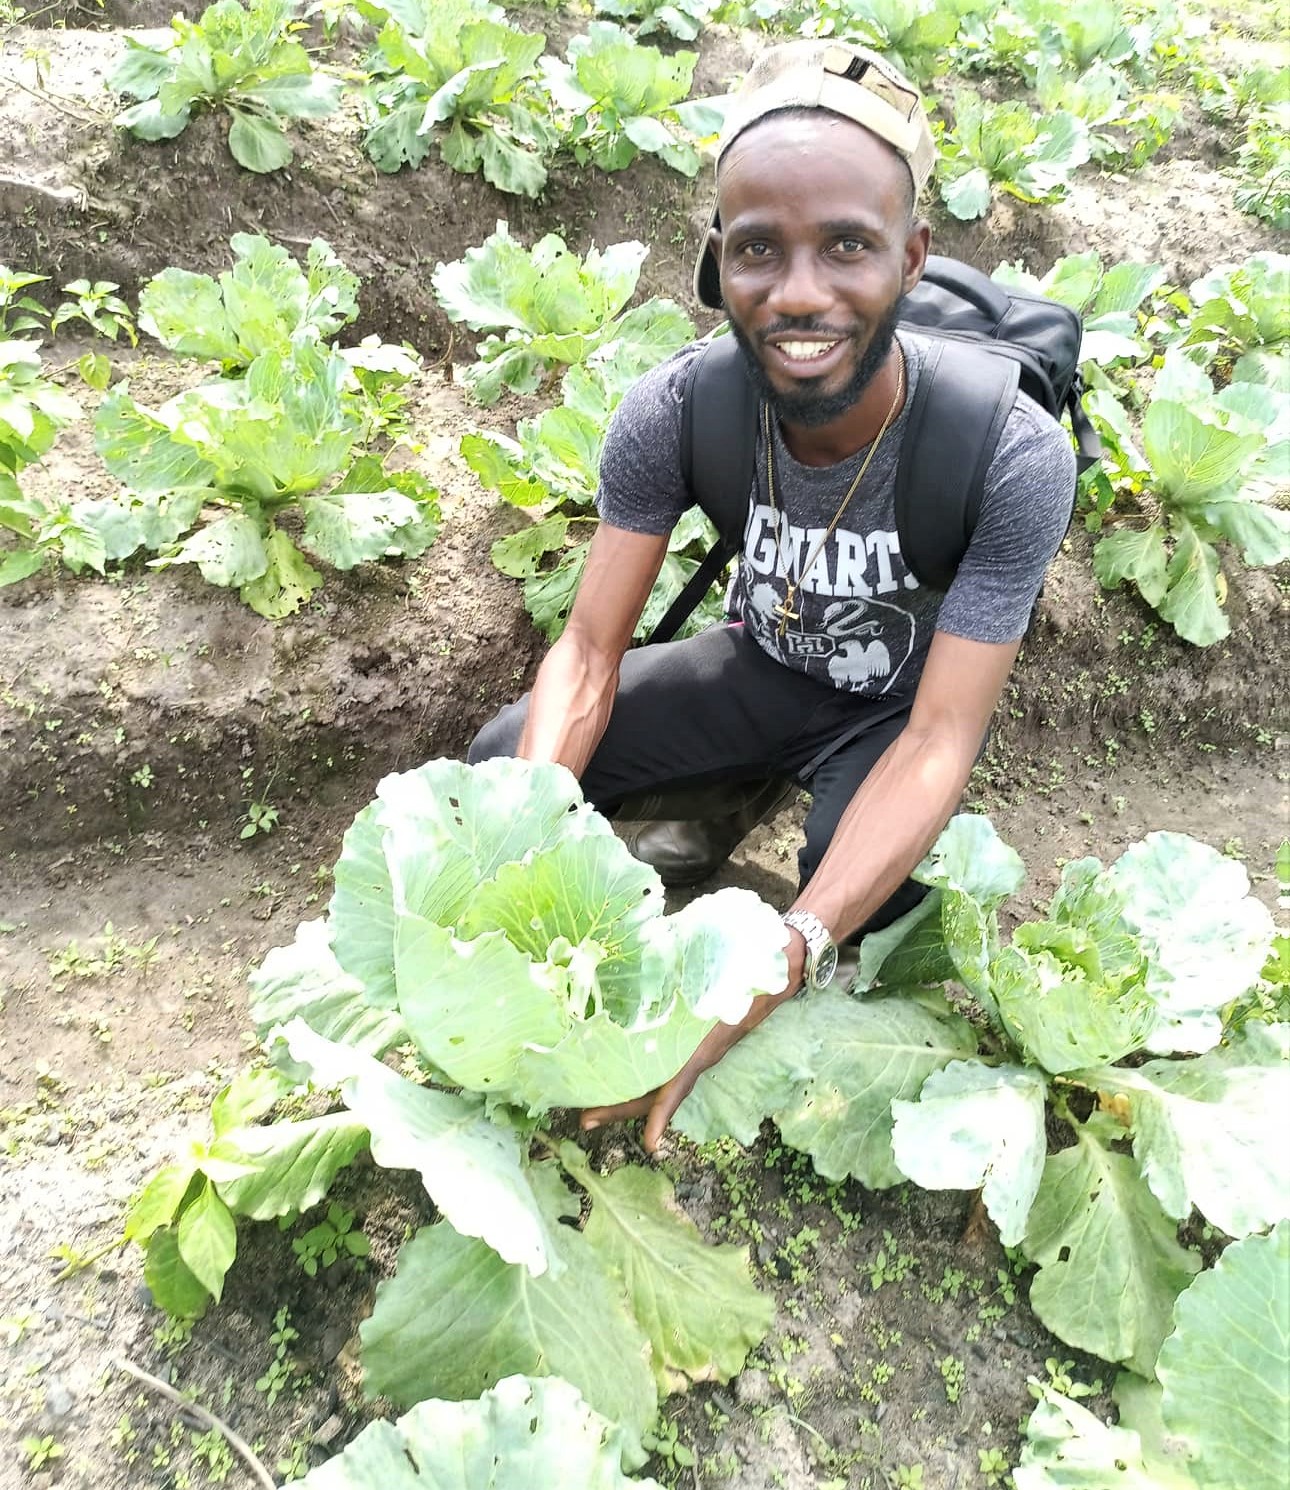 Daniel observes the hundreds of cabbage plants on the beds in Dodee Village.